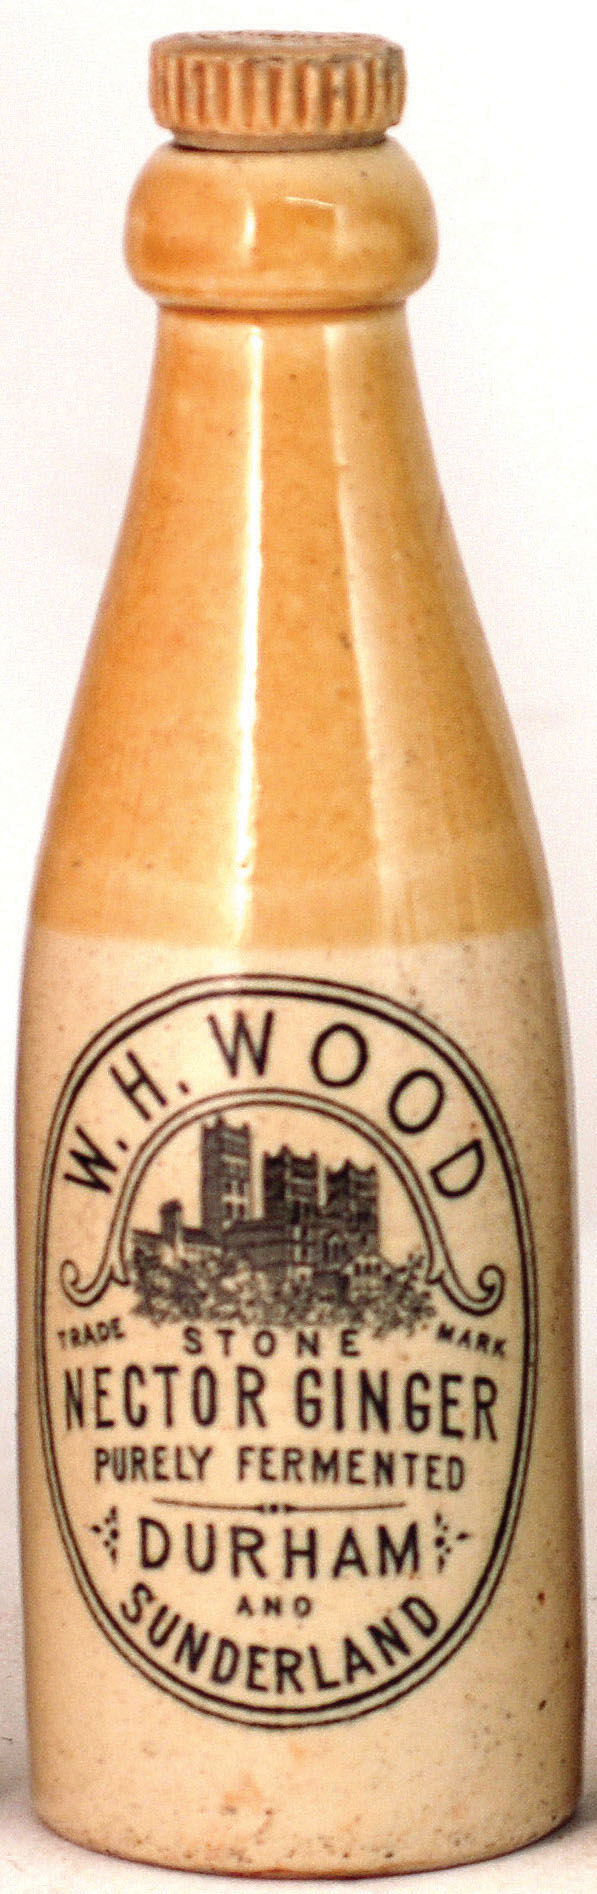 W. H. WOOD GINGER BEER. 8.5ins tall to top of screw stopper, ch. t.t. black transfer ‘W.H. WOOD/